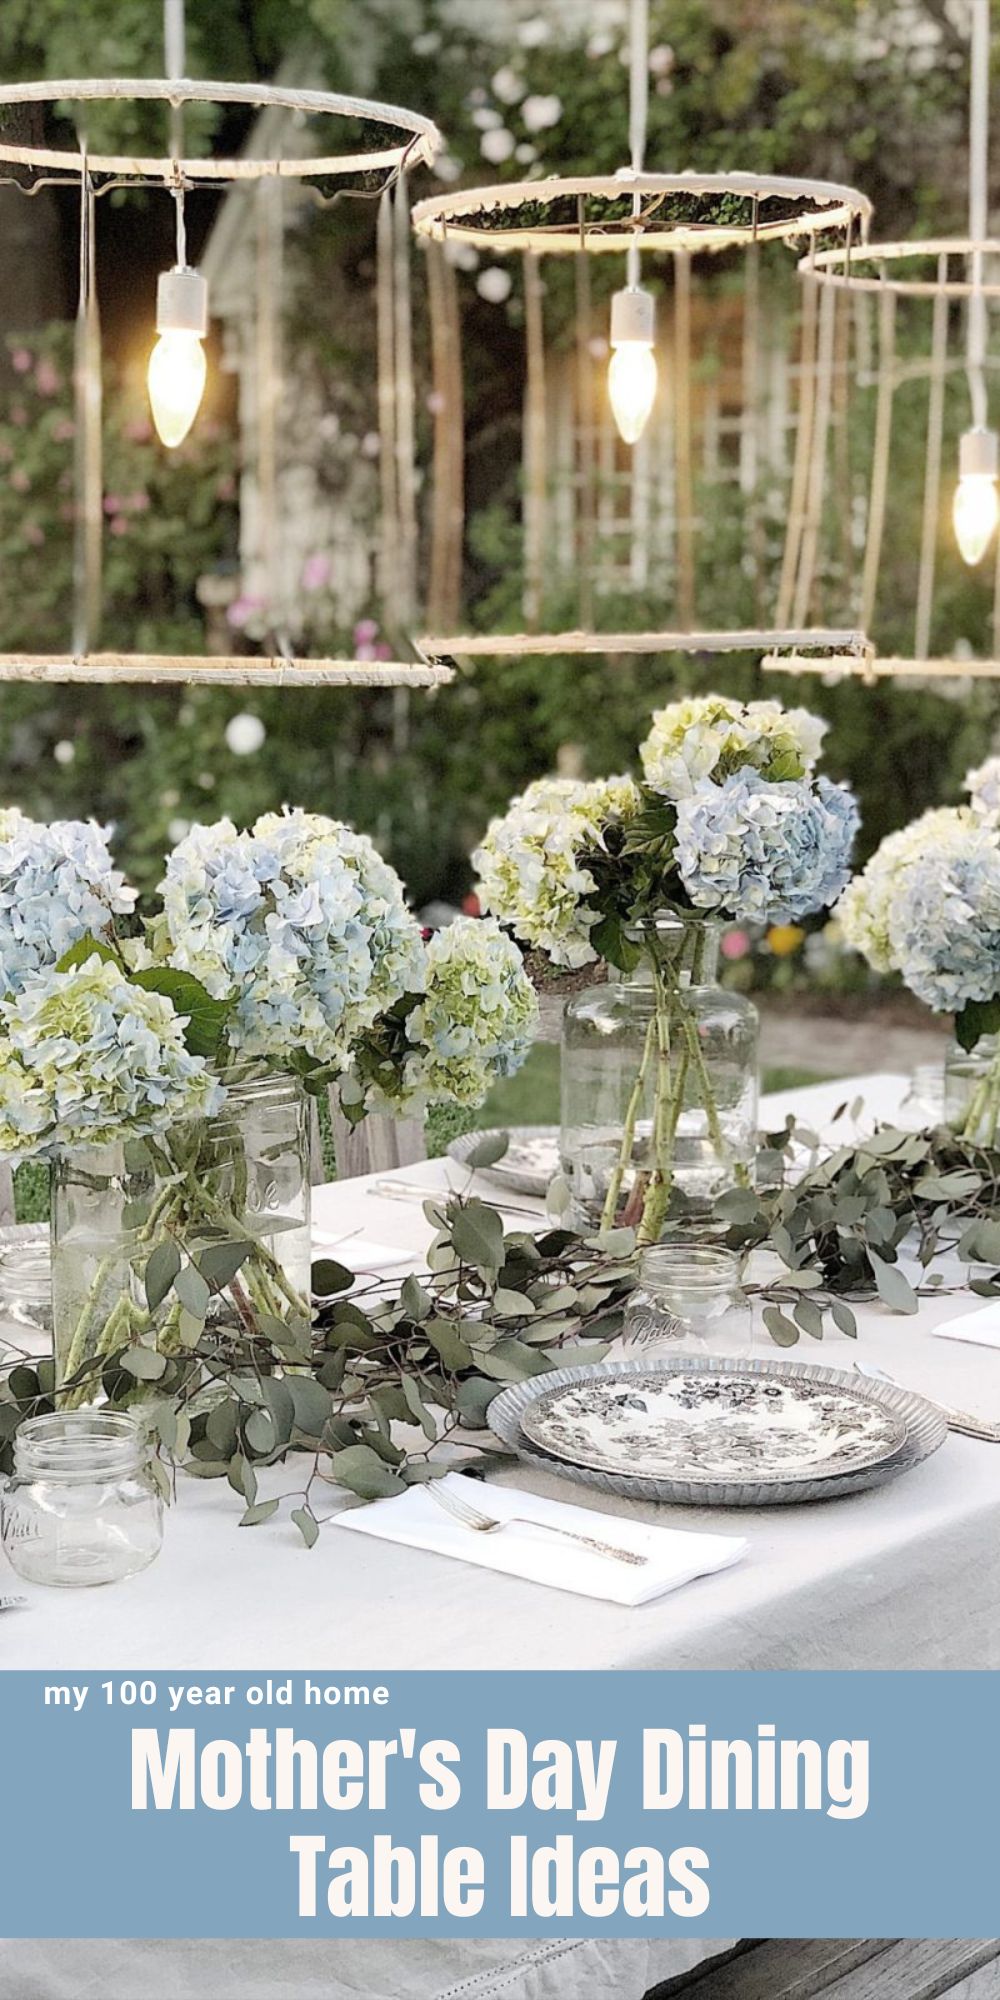 Mother’s Day is a day to celebrate all of the mothers in our lives. Here are some Mother's Day Dining Table ideas to help make the day easier.